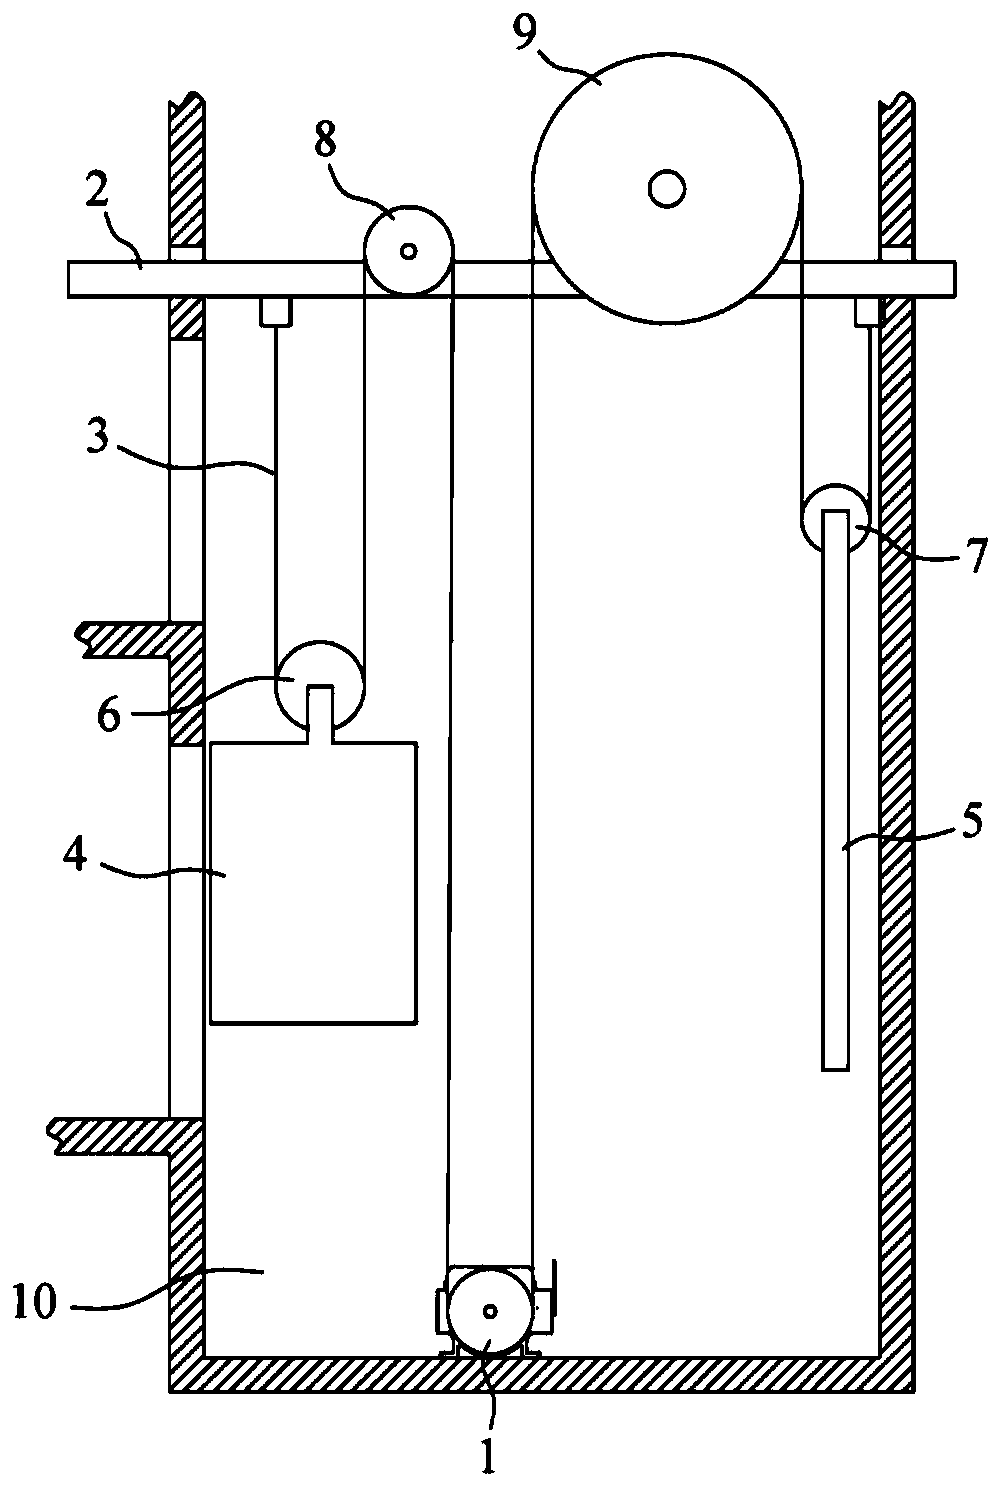 Shaft elevator with underlying traction machine for building construction